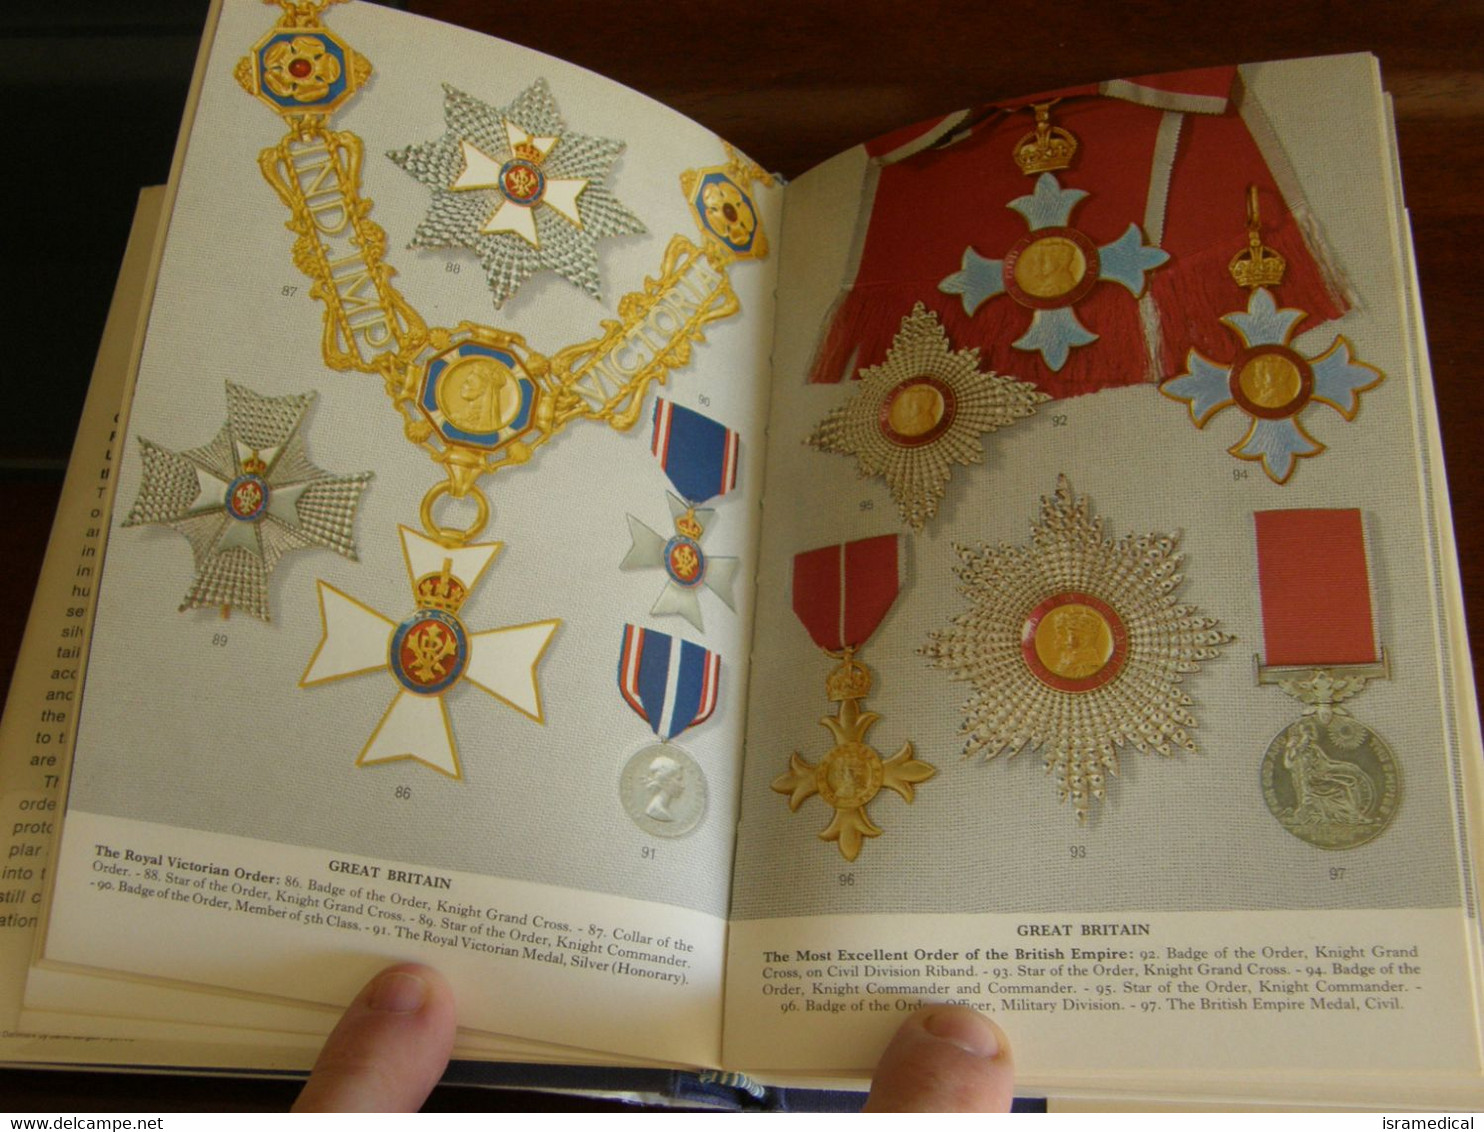 ORDERS AND DECORATIONS OF EUROPE IN COLOR MACMILLAN - Kataloge & CDs